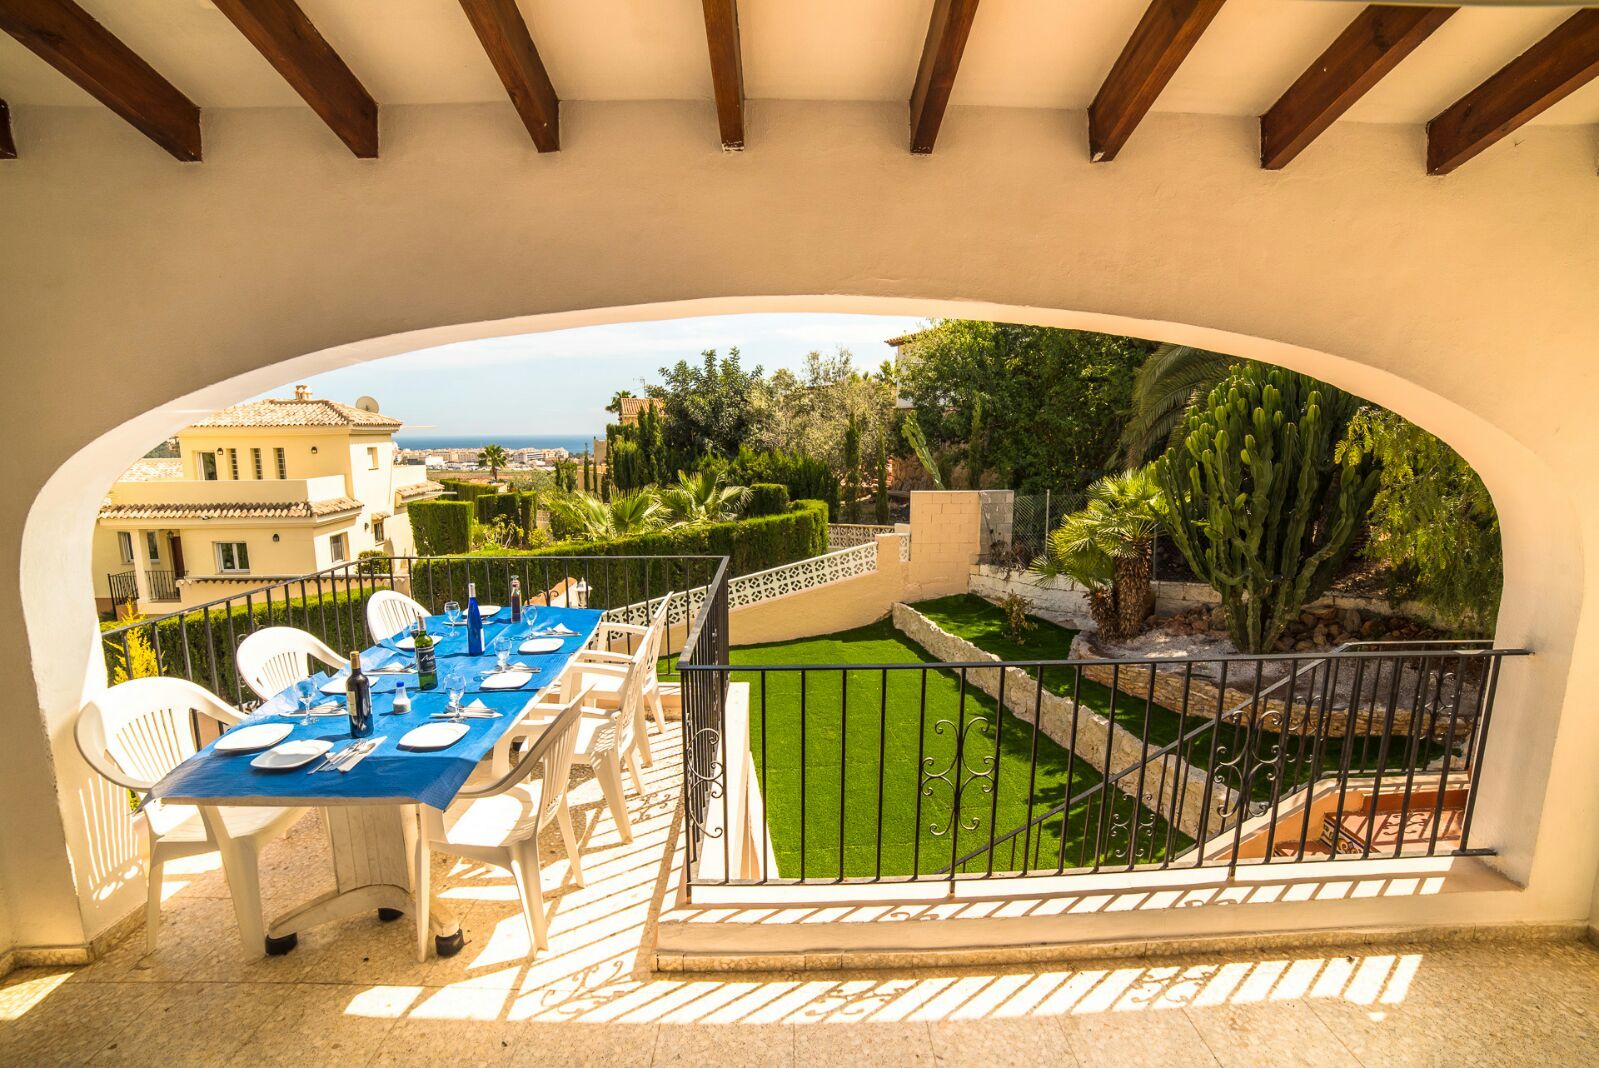 Villa for sale with sea views and swimming pool near the village.